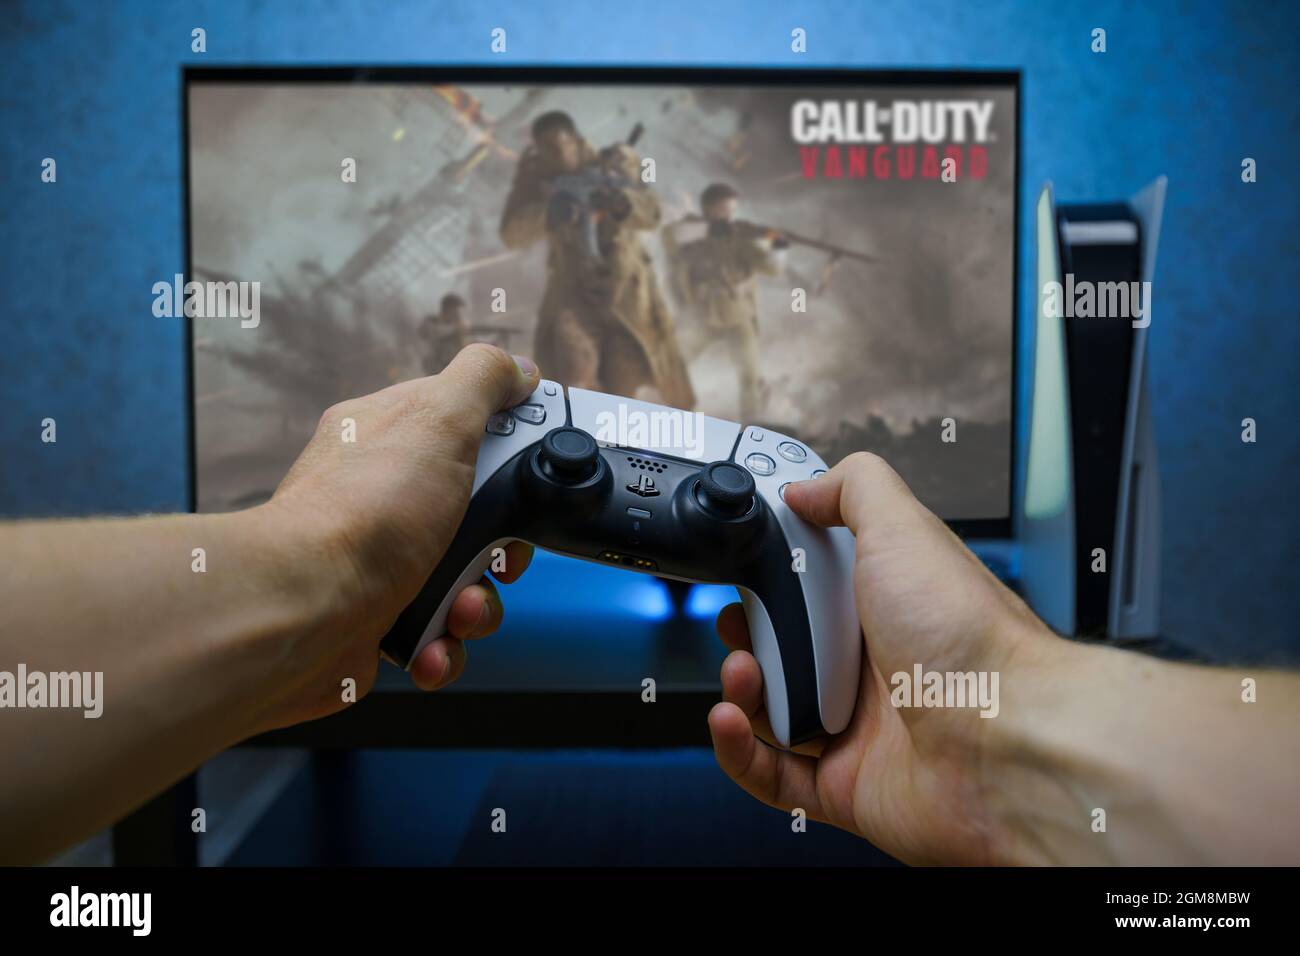 Call of Duty: Vanguard is first-person shooter video game. Man playing video game with Playstation 5 Stock Photo